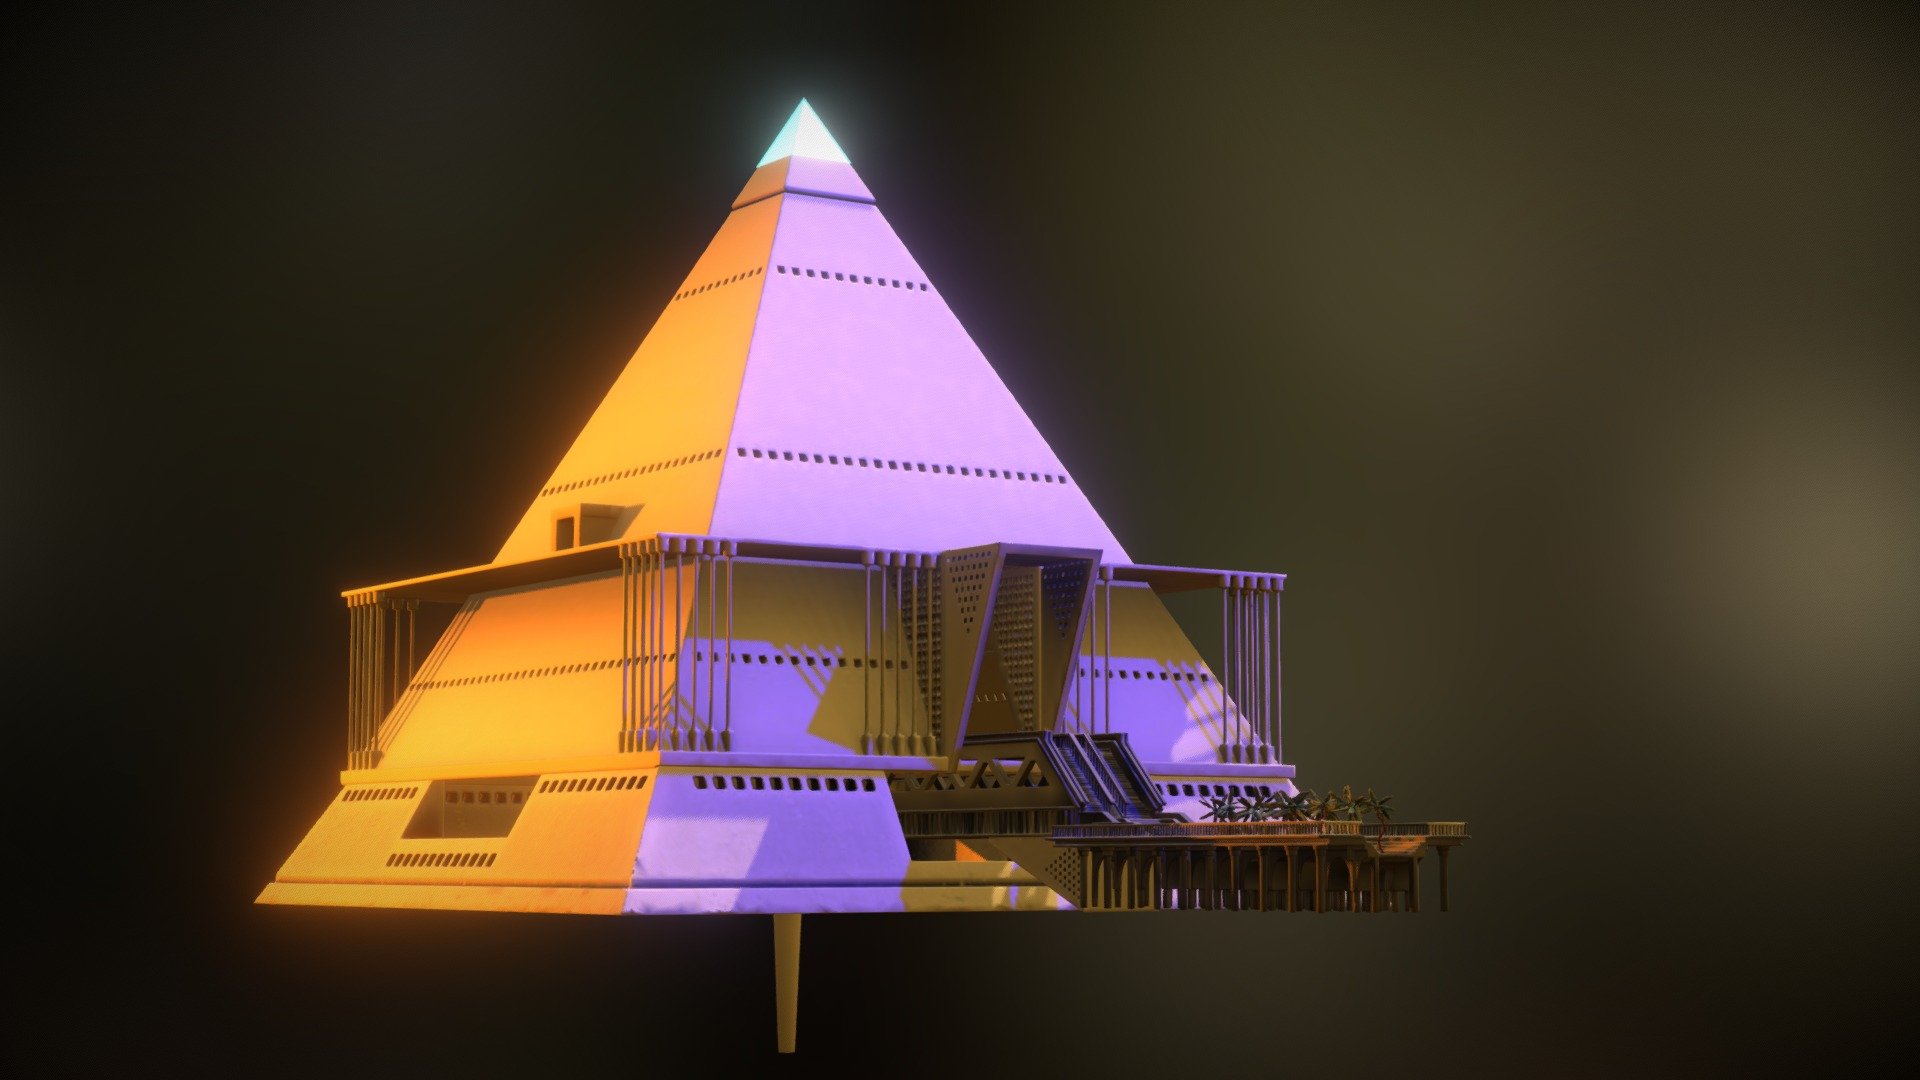 If you spent any time watching user created content on the internet you may have heard an interesting theory that the Great Pyramid in Egypt may have had a function similar to a Tesla coil where energy is gathered from underground aquafers which pass thru the the interior granite which permits ionization. A secondary layer, a mix of limestone, crystal and metals are conductive while the outter most limestone layer acts as an insulator.

The pyramid shape funnels the energy to the gold capstone which conducts a path of negative ions to the atmosphere.

This structure re-imagines this function as truth and provides free energy in the manner of the Tesla Coil.

I'm not an energy expert but here is a video explaining how it is theorized to work. https://www.youtube.com/watch?v=f7RtnEghLVc&amp;vl=en - Pyramid Power Plant - 3D model by TheSpiritAmbassador 3d model